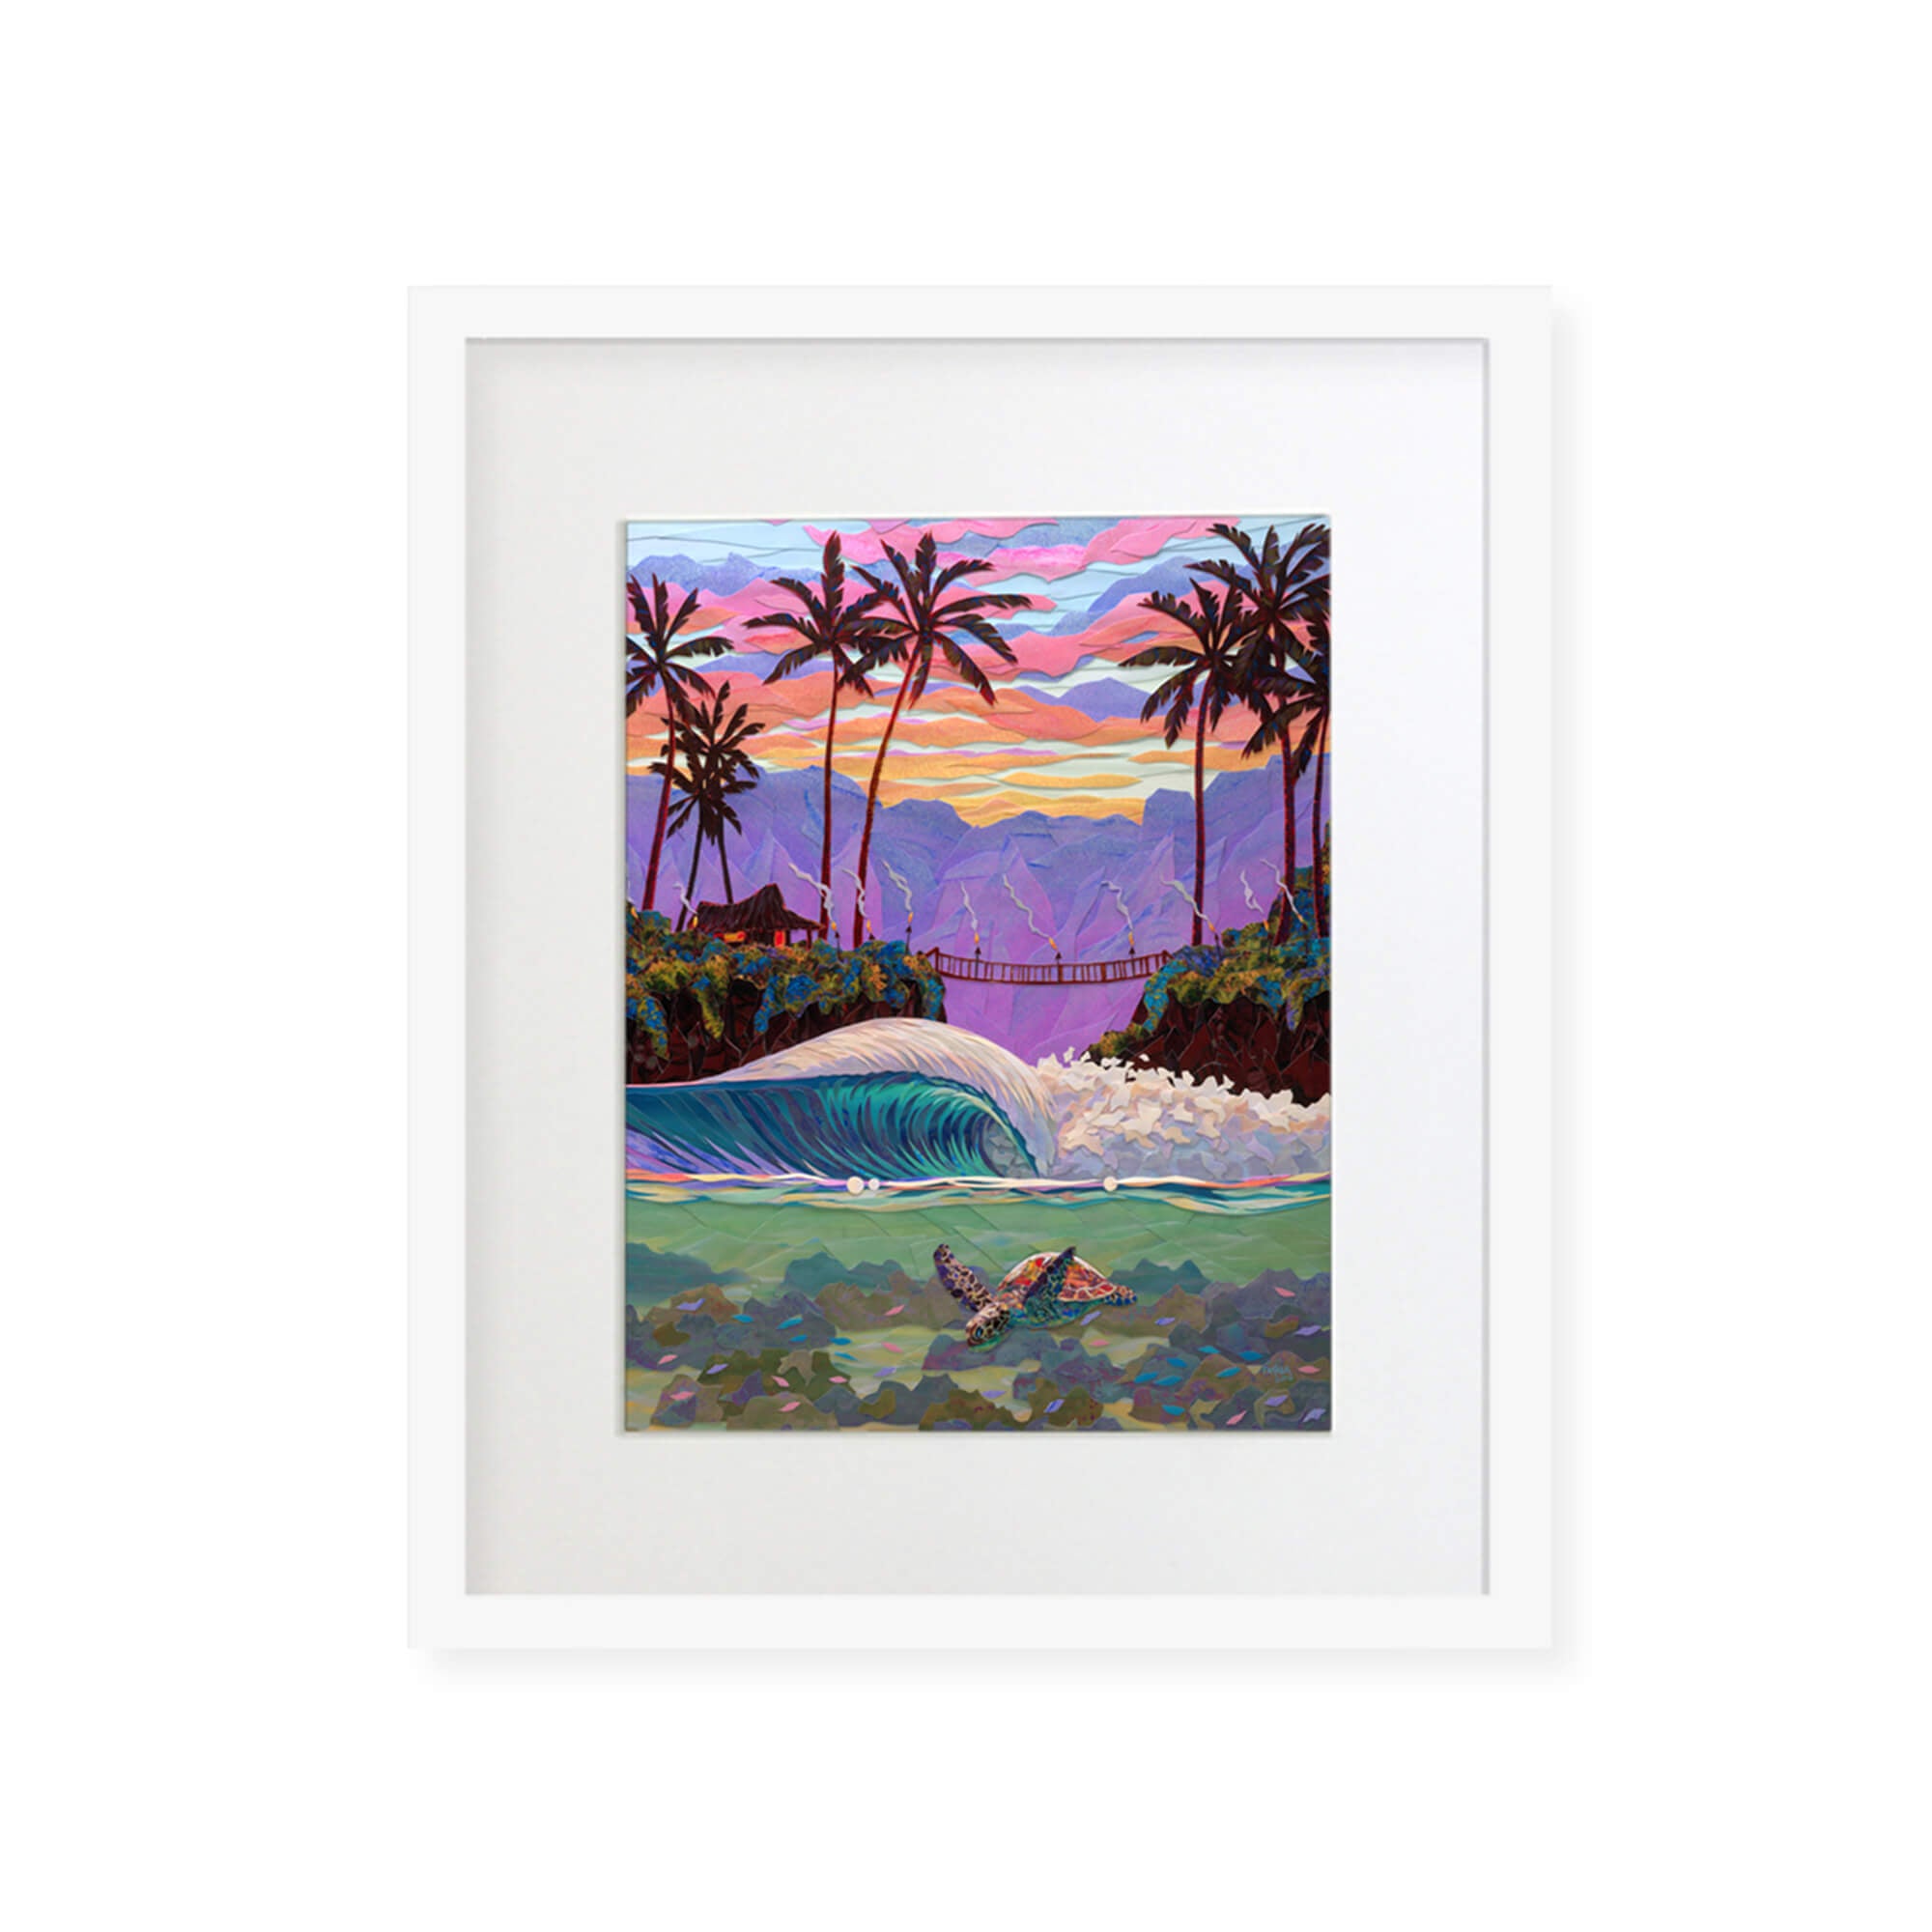 A framed matted art print featuring a collage of a beautiful seascape with a sea turtle swimming, a hut, and a gradient purple-pink-hued mountain background by Hawaii artist Patrick Parker